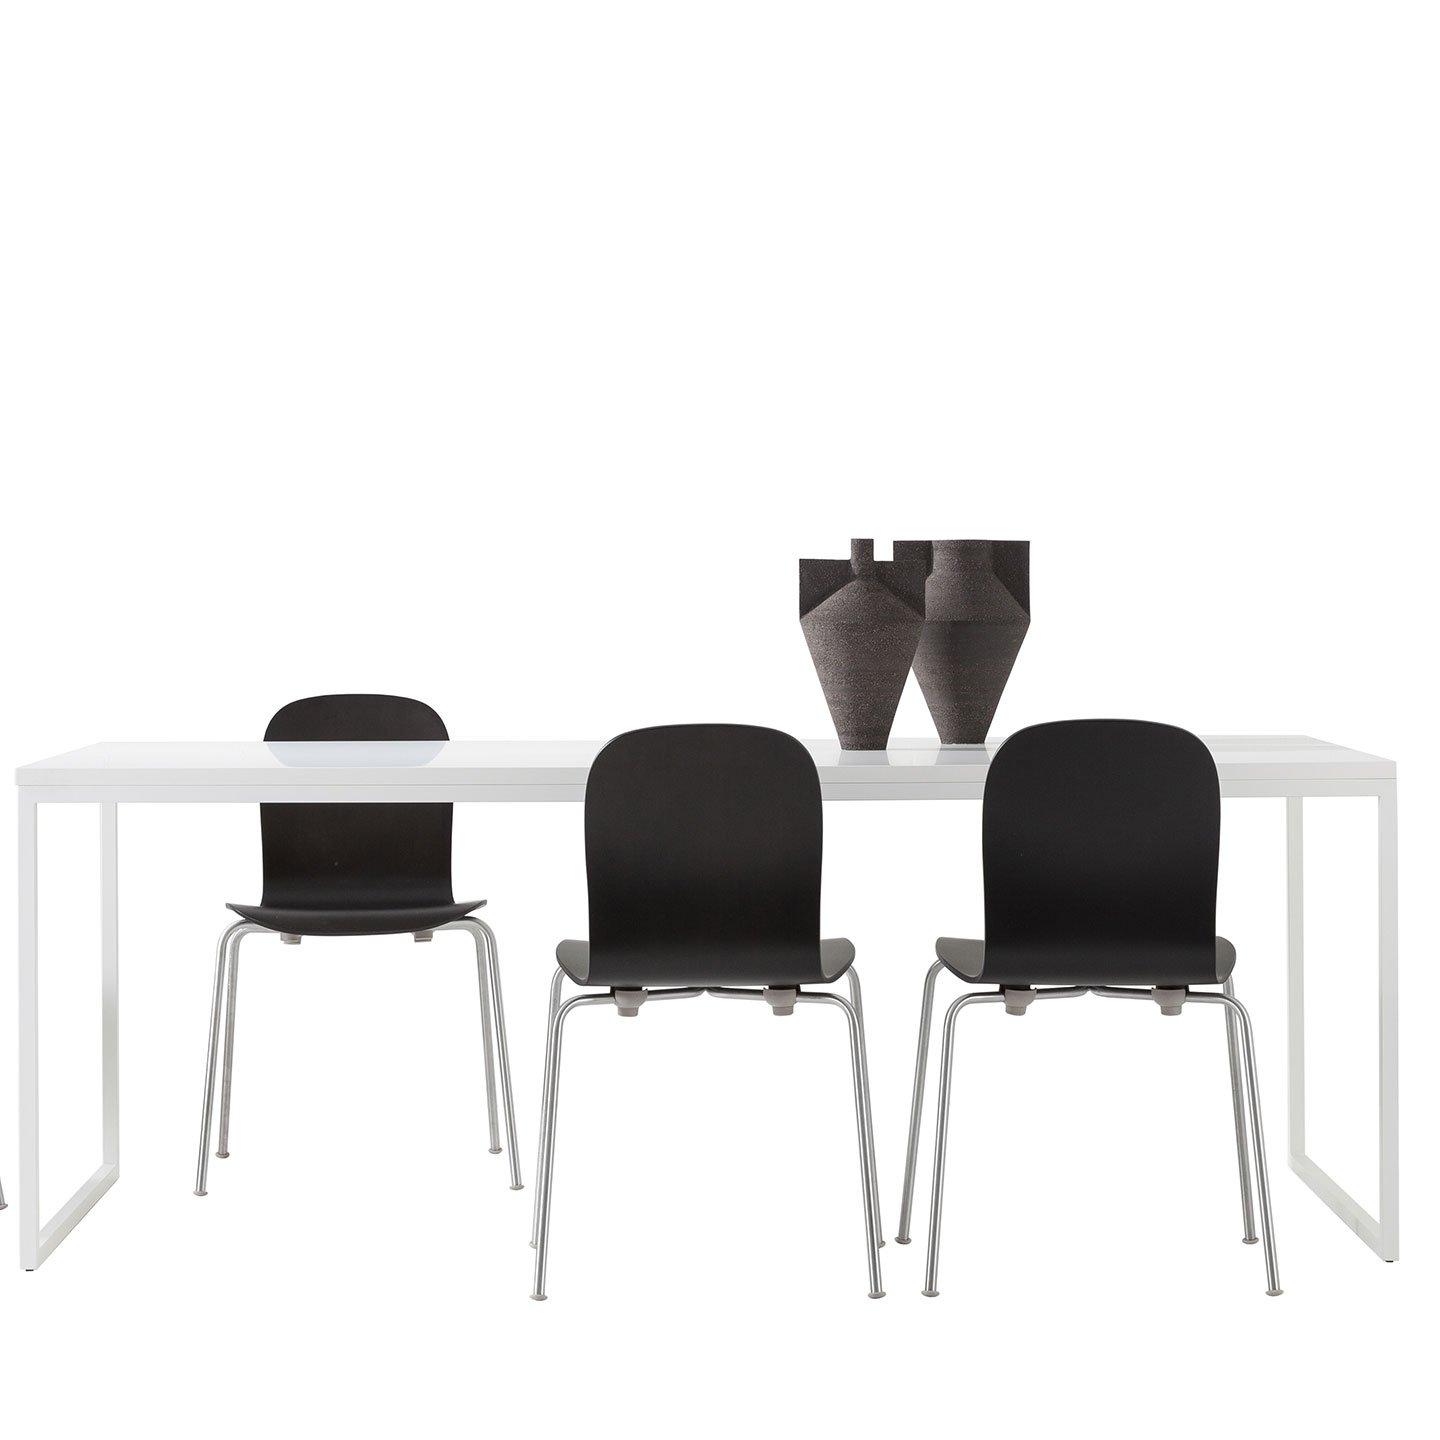 Haworth Fronzoni 64 table with 2 legs in matte white finish as a dining room table with a white backdrop